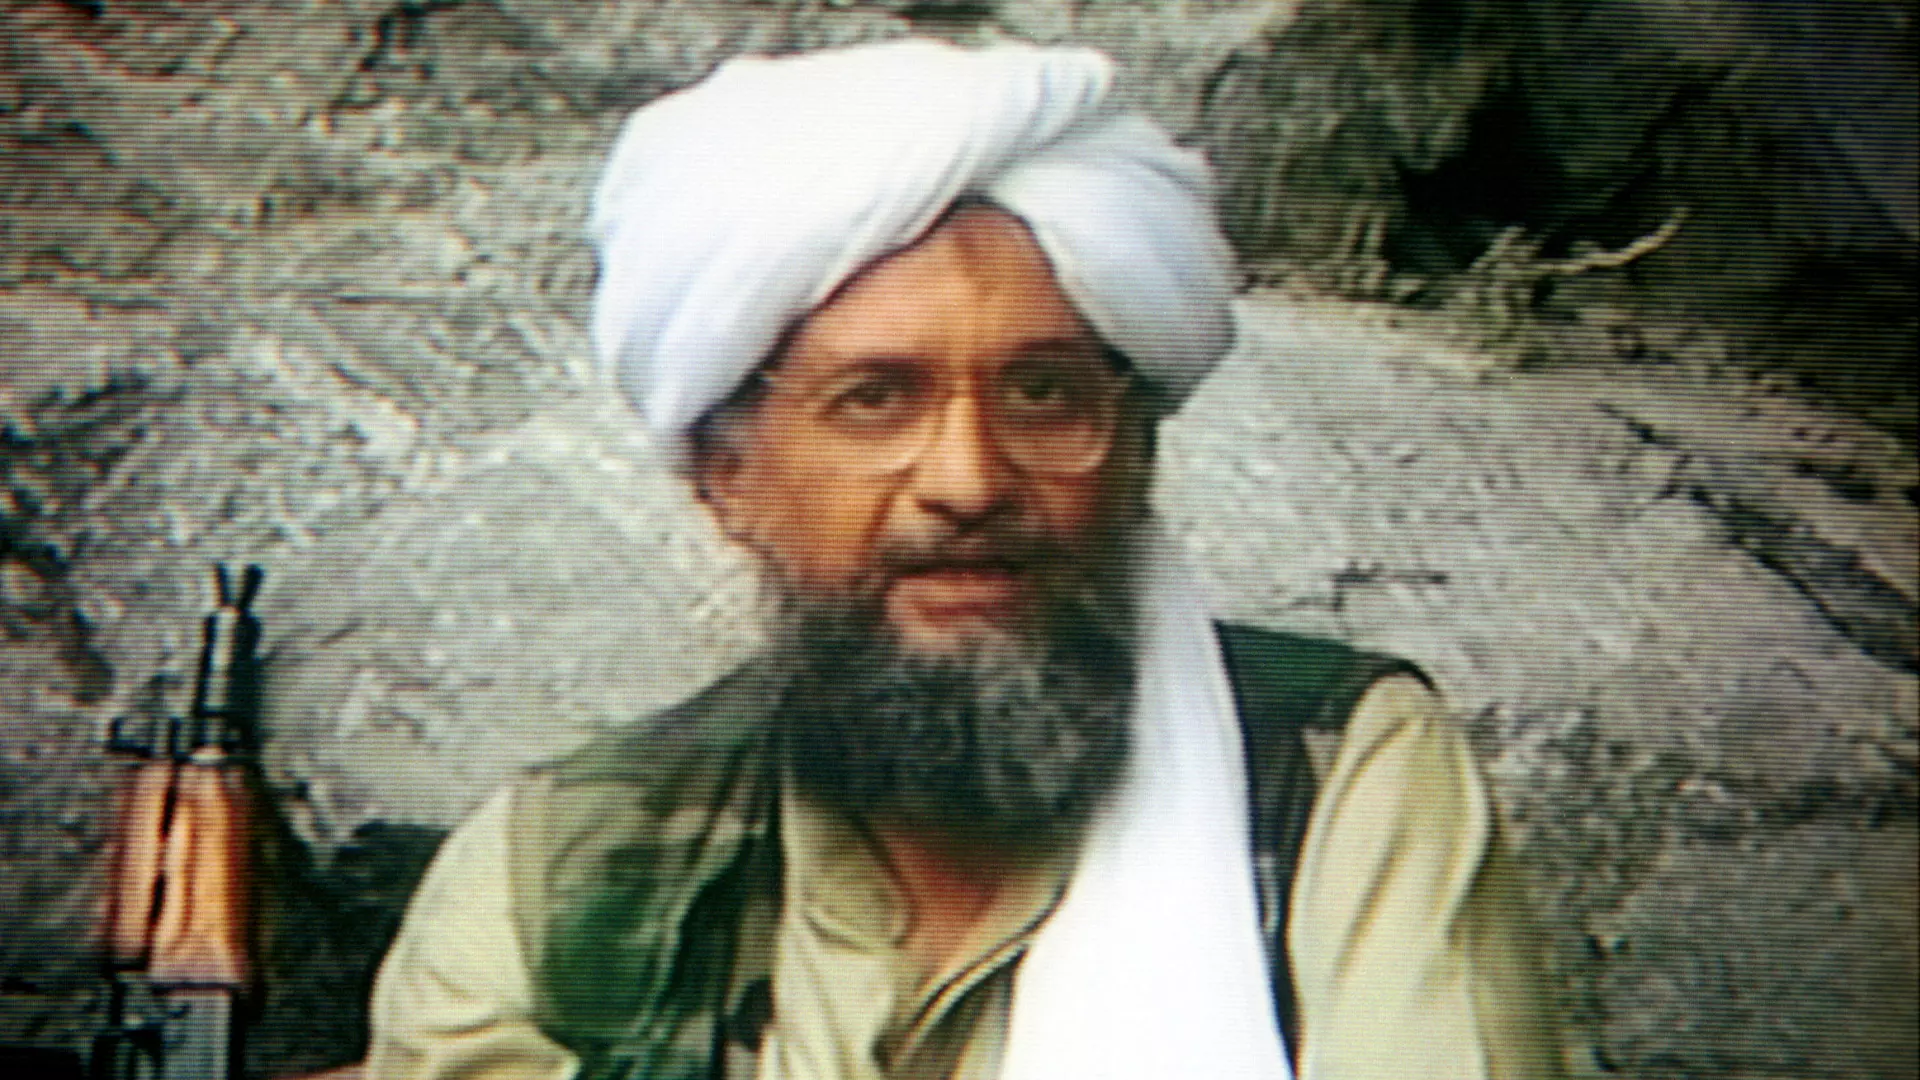 The Death of Ayman al-Zawahiri: an attempt to make the world a safer place to live